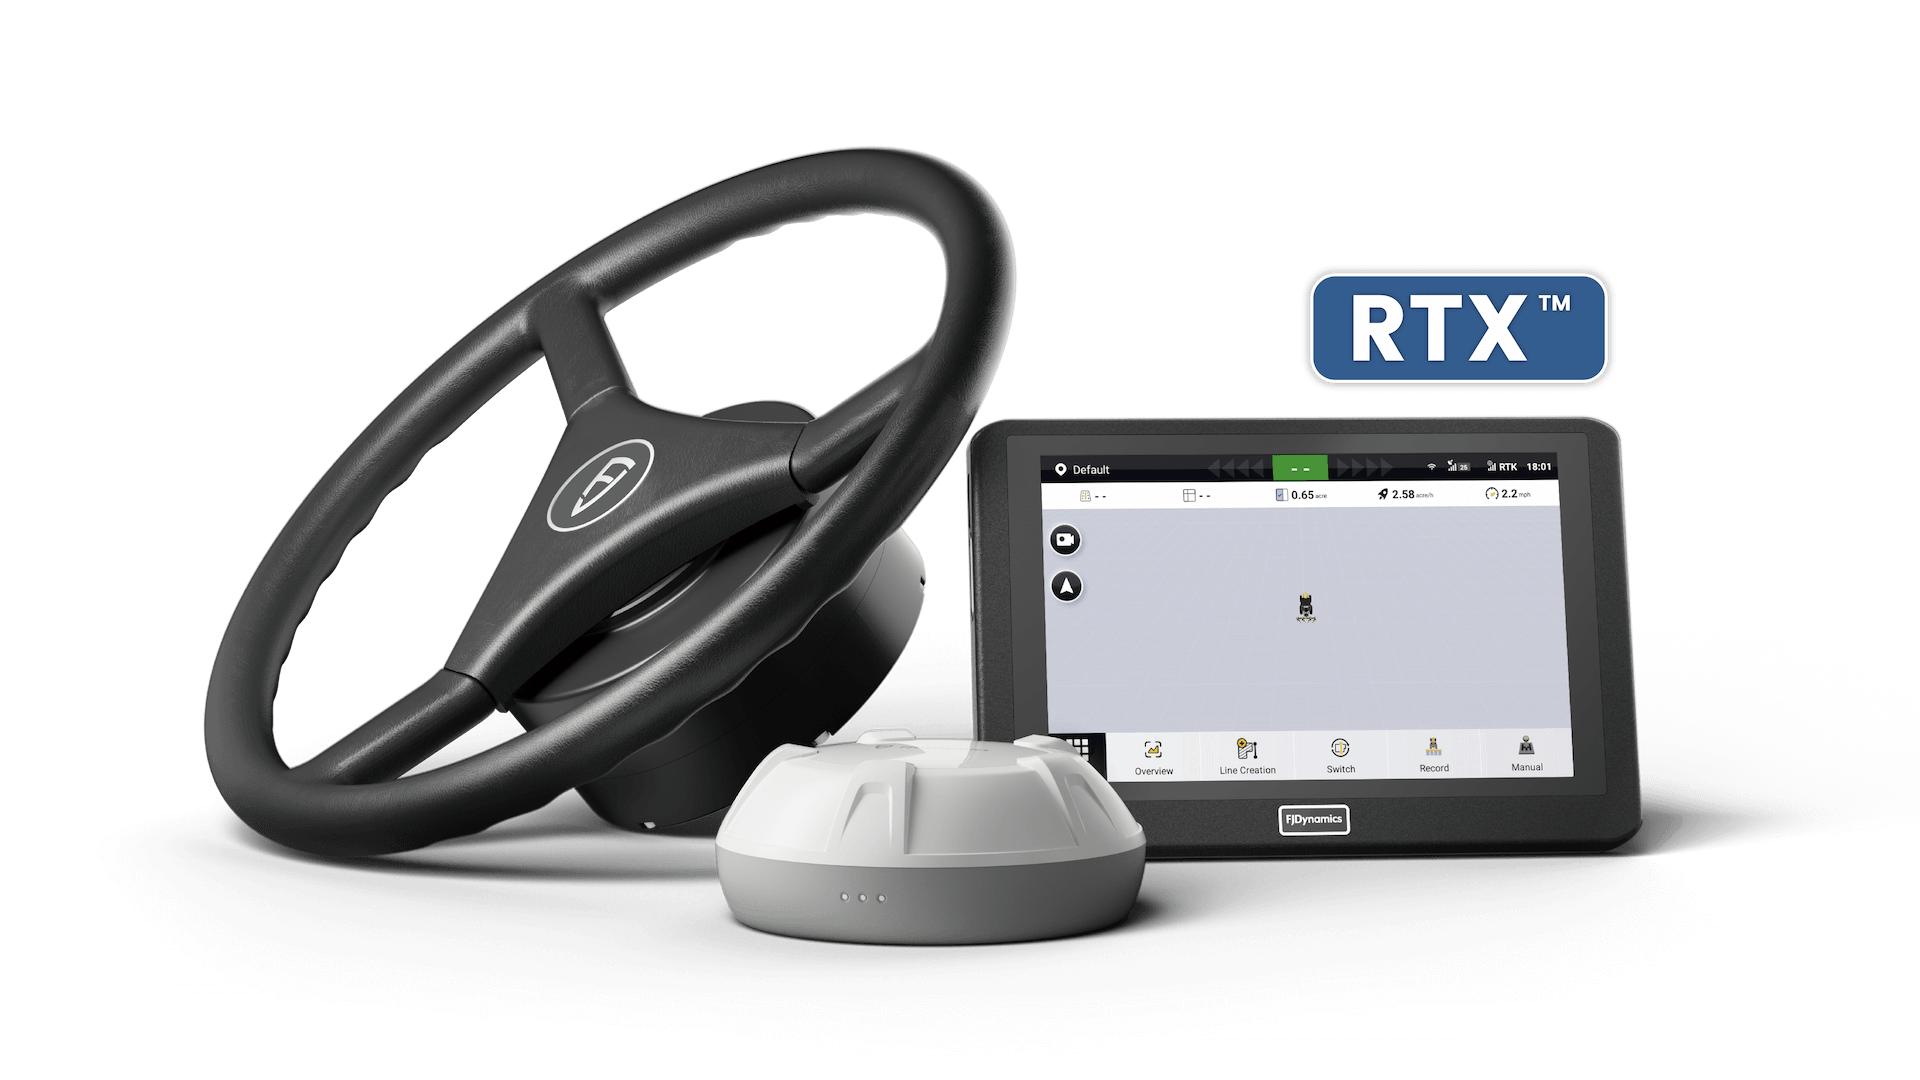 FJD AT2 PRO comes with built-in RTX™ correction services* hardware, offering centimeter-level positioning accuracy via a subscription service. It is available worldwide without the need of a base station or internet connectivity that limits the operating area.